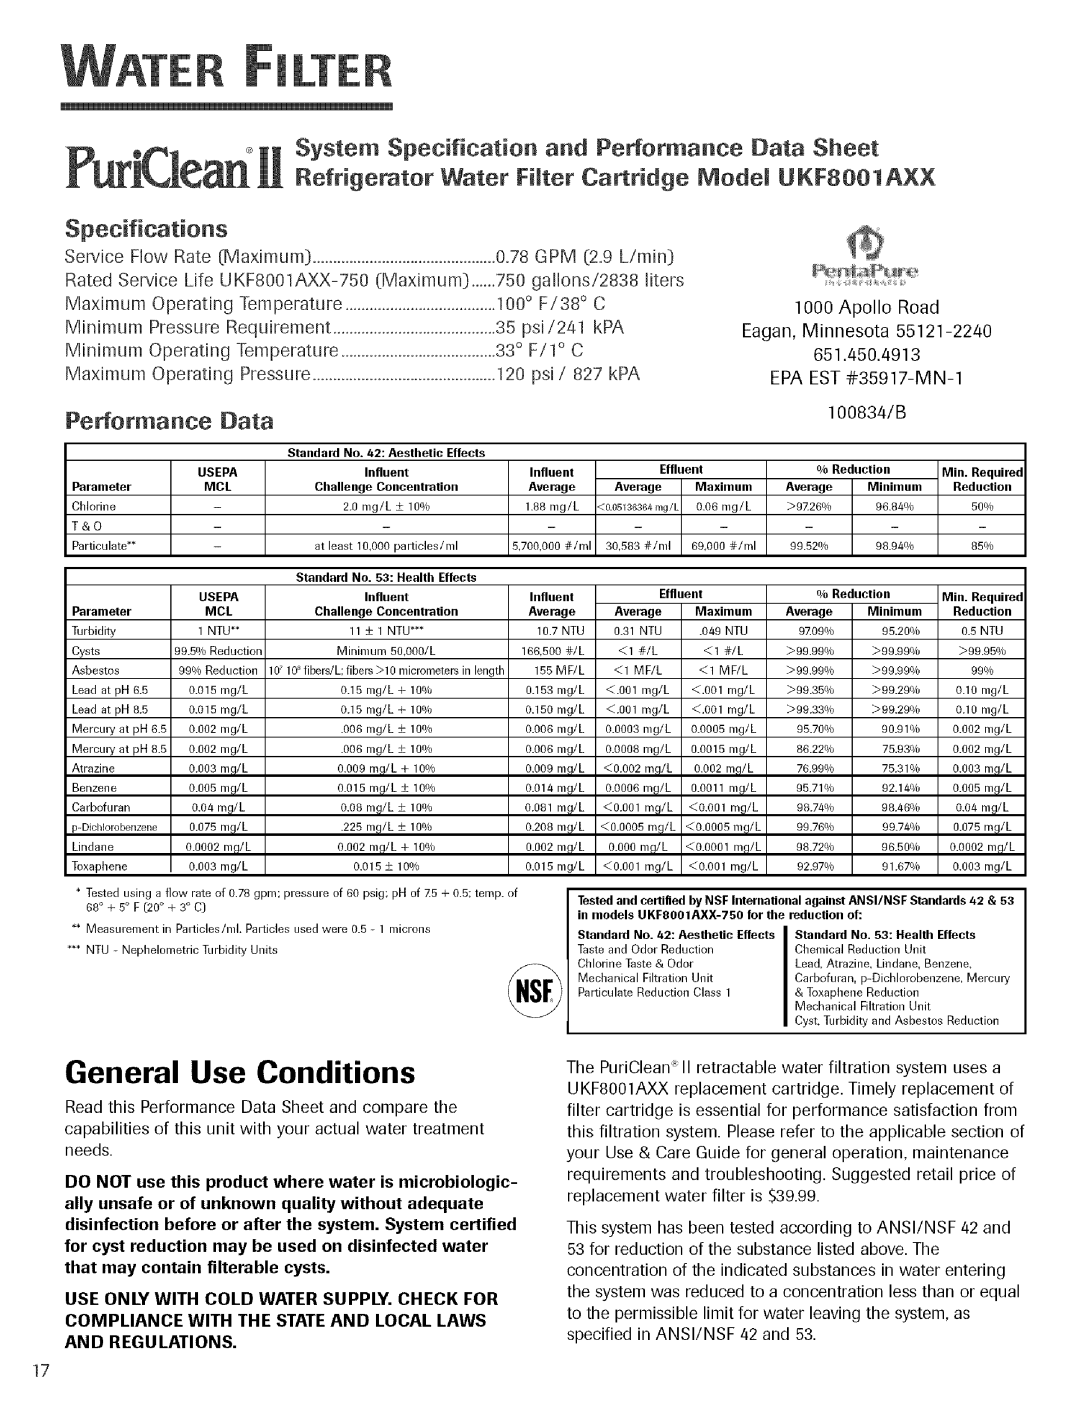 Jenn-Air Refrigerator General Use Conditions, System Specification and Performance Data Sheet, Specifications 